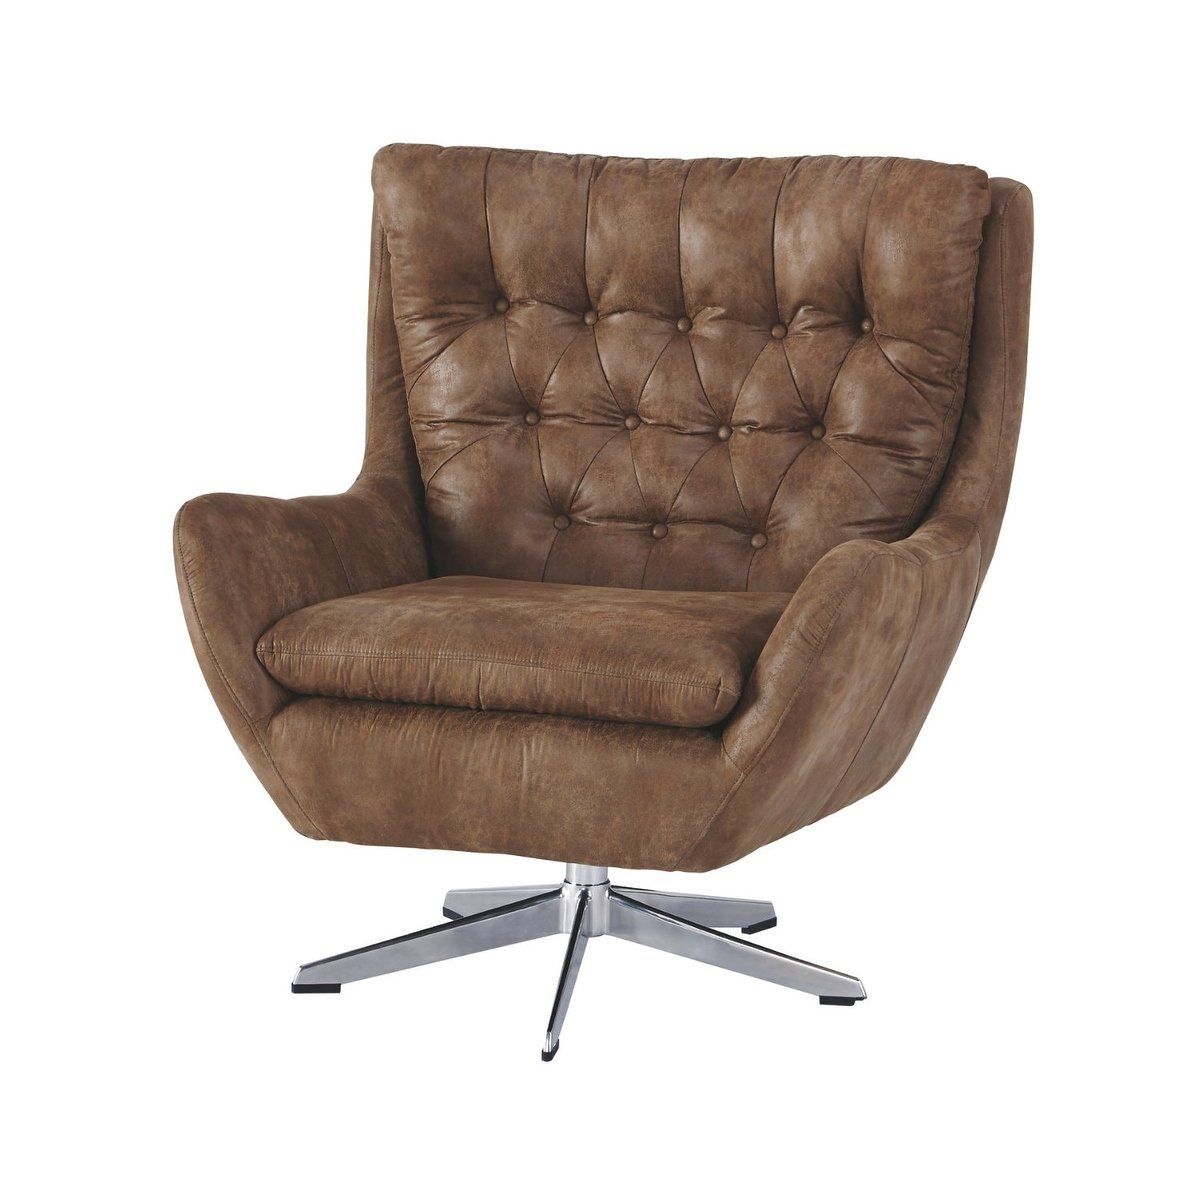 Shop Signature Designashley Velburg Swivel Accent Chair – Free Throughout Devon Ii Swivel Accent Chairs (View 7 of 20)